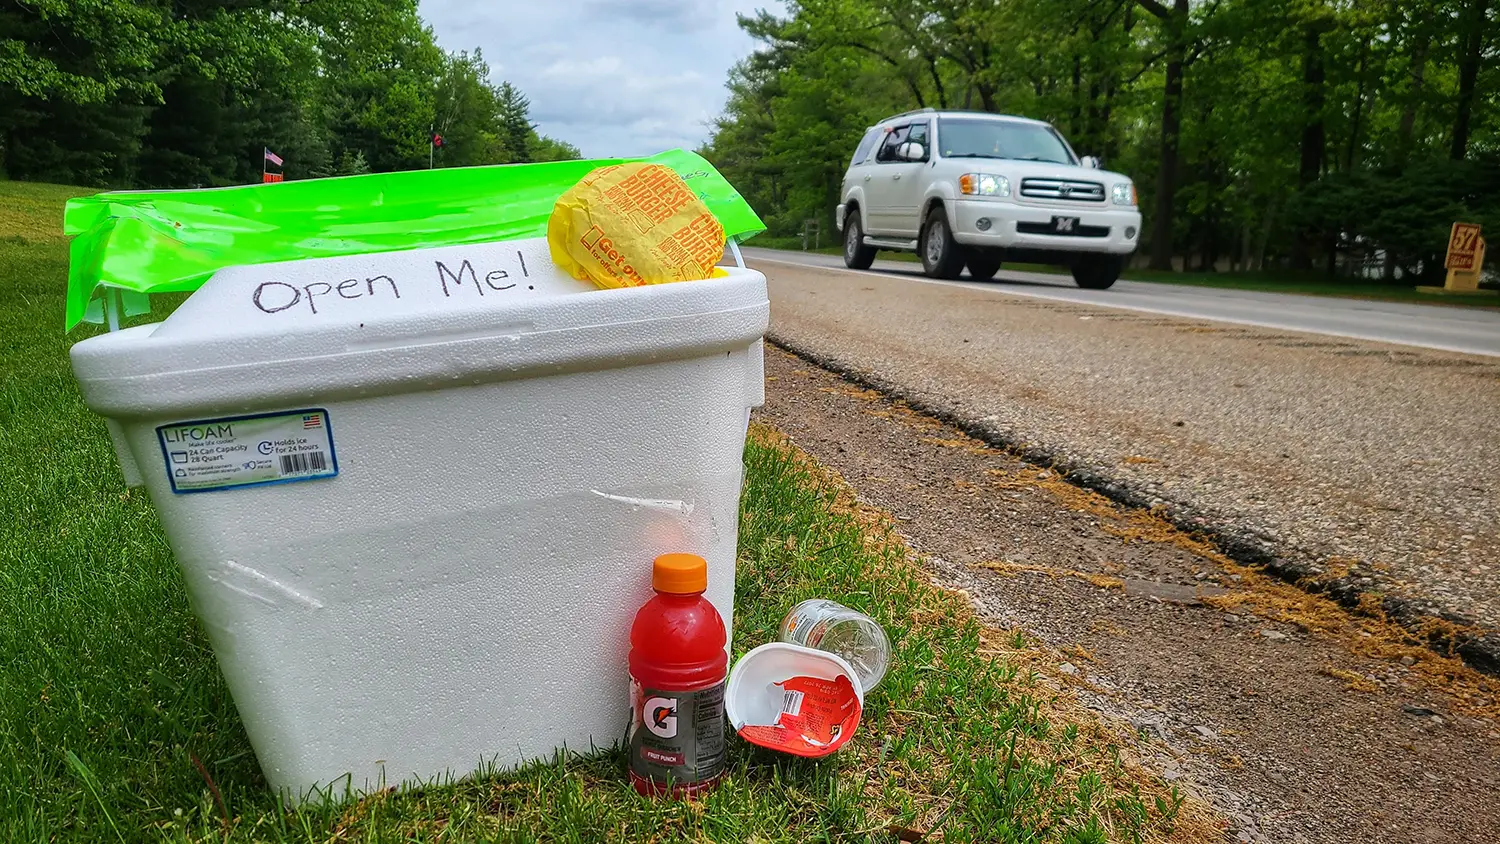 A cooler placed on the course by a Road Angel